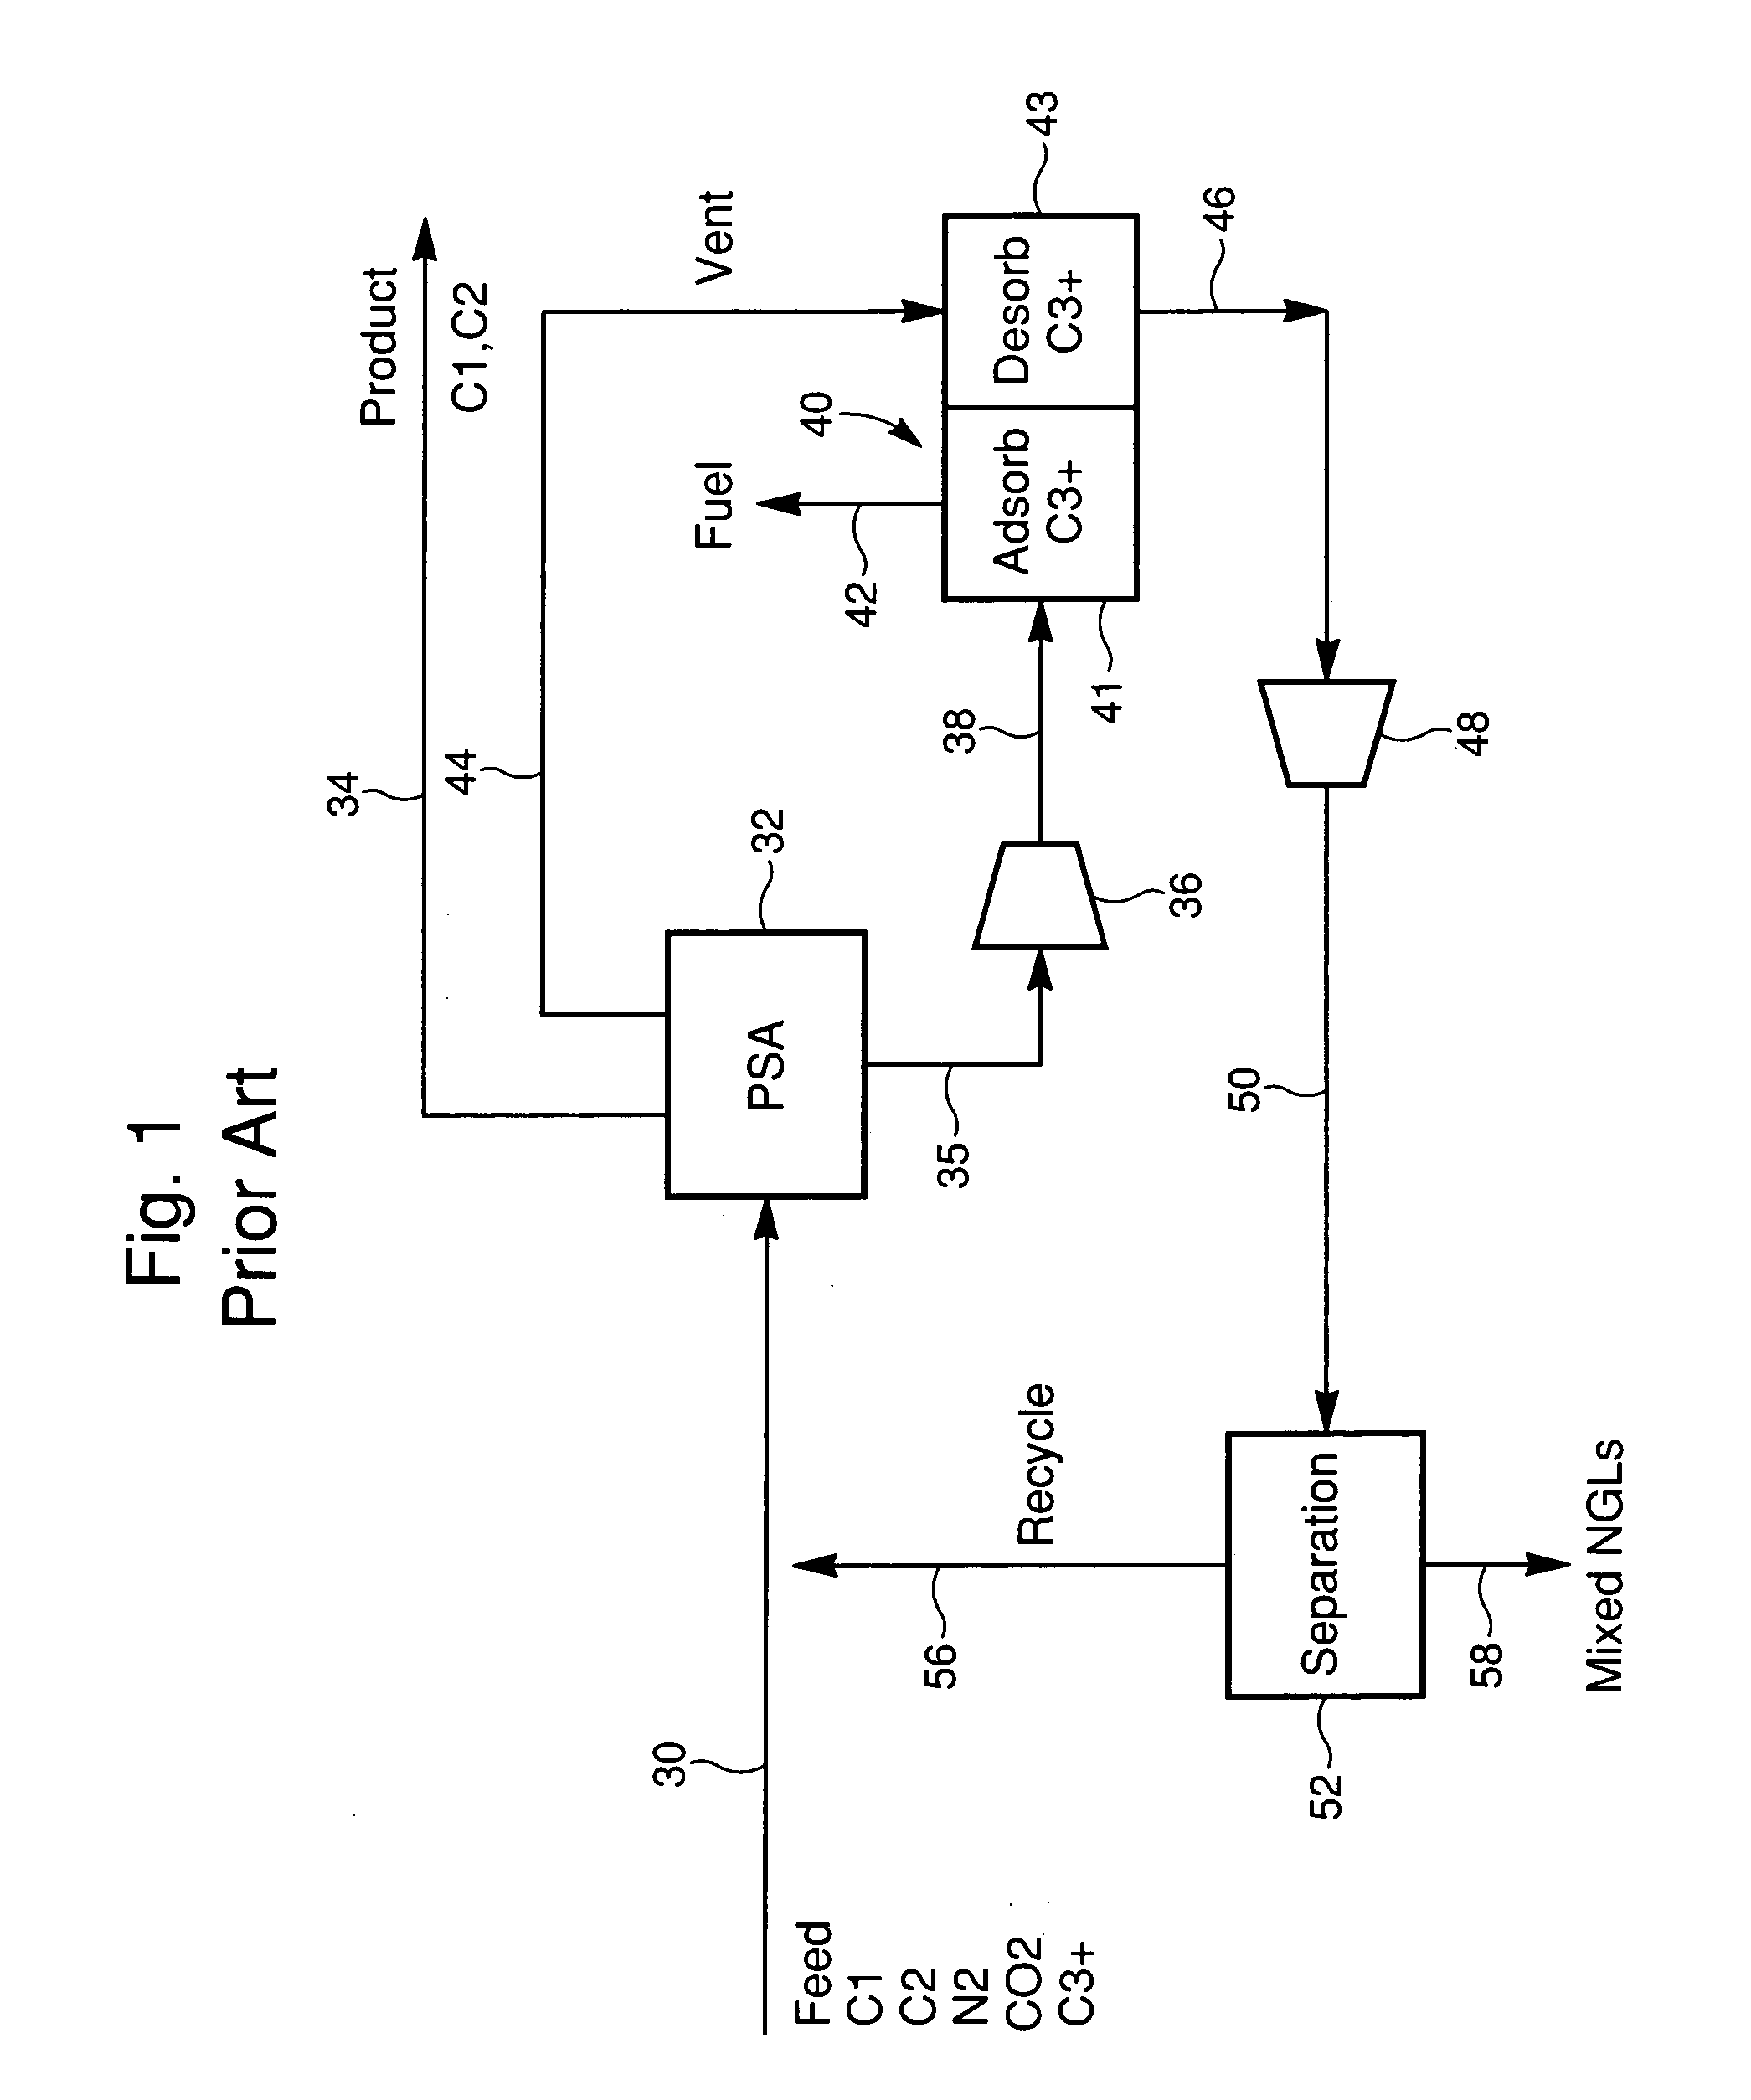 NGL trap-method for recovery of heavy hydrocarbon from natural gas